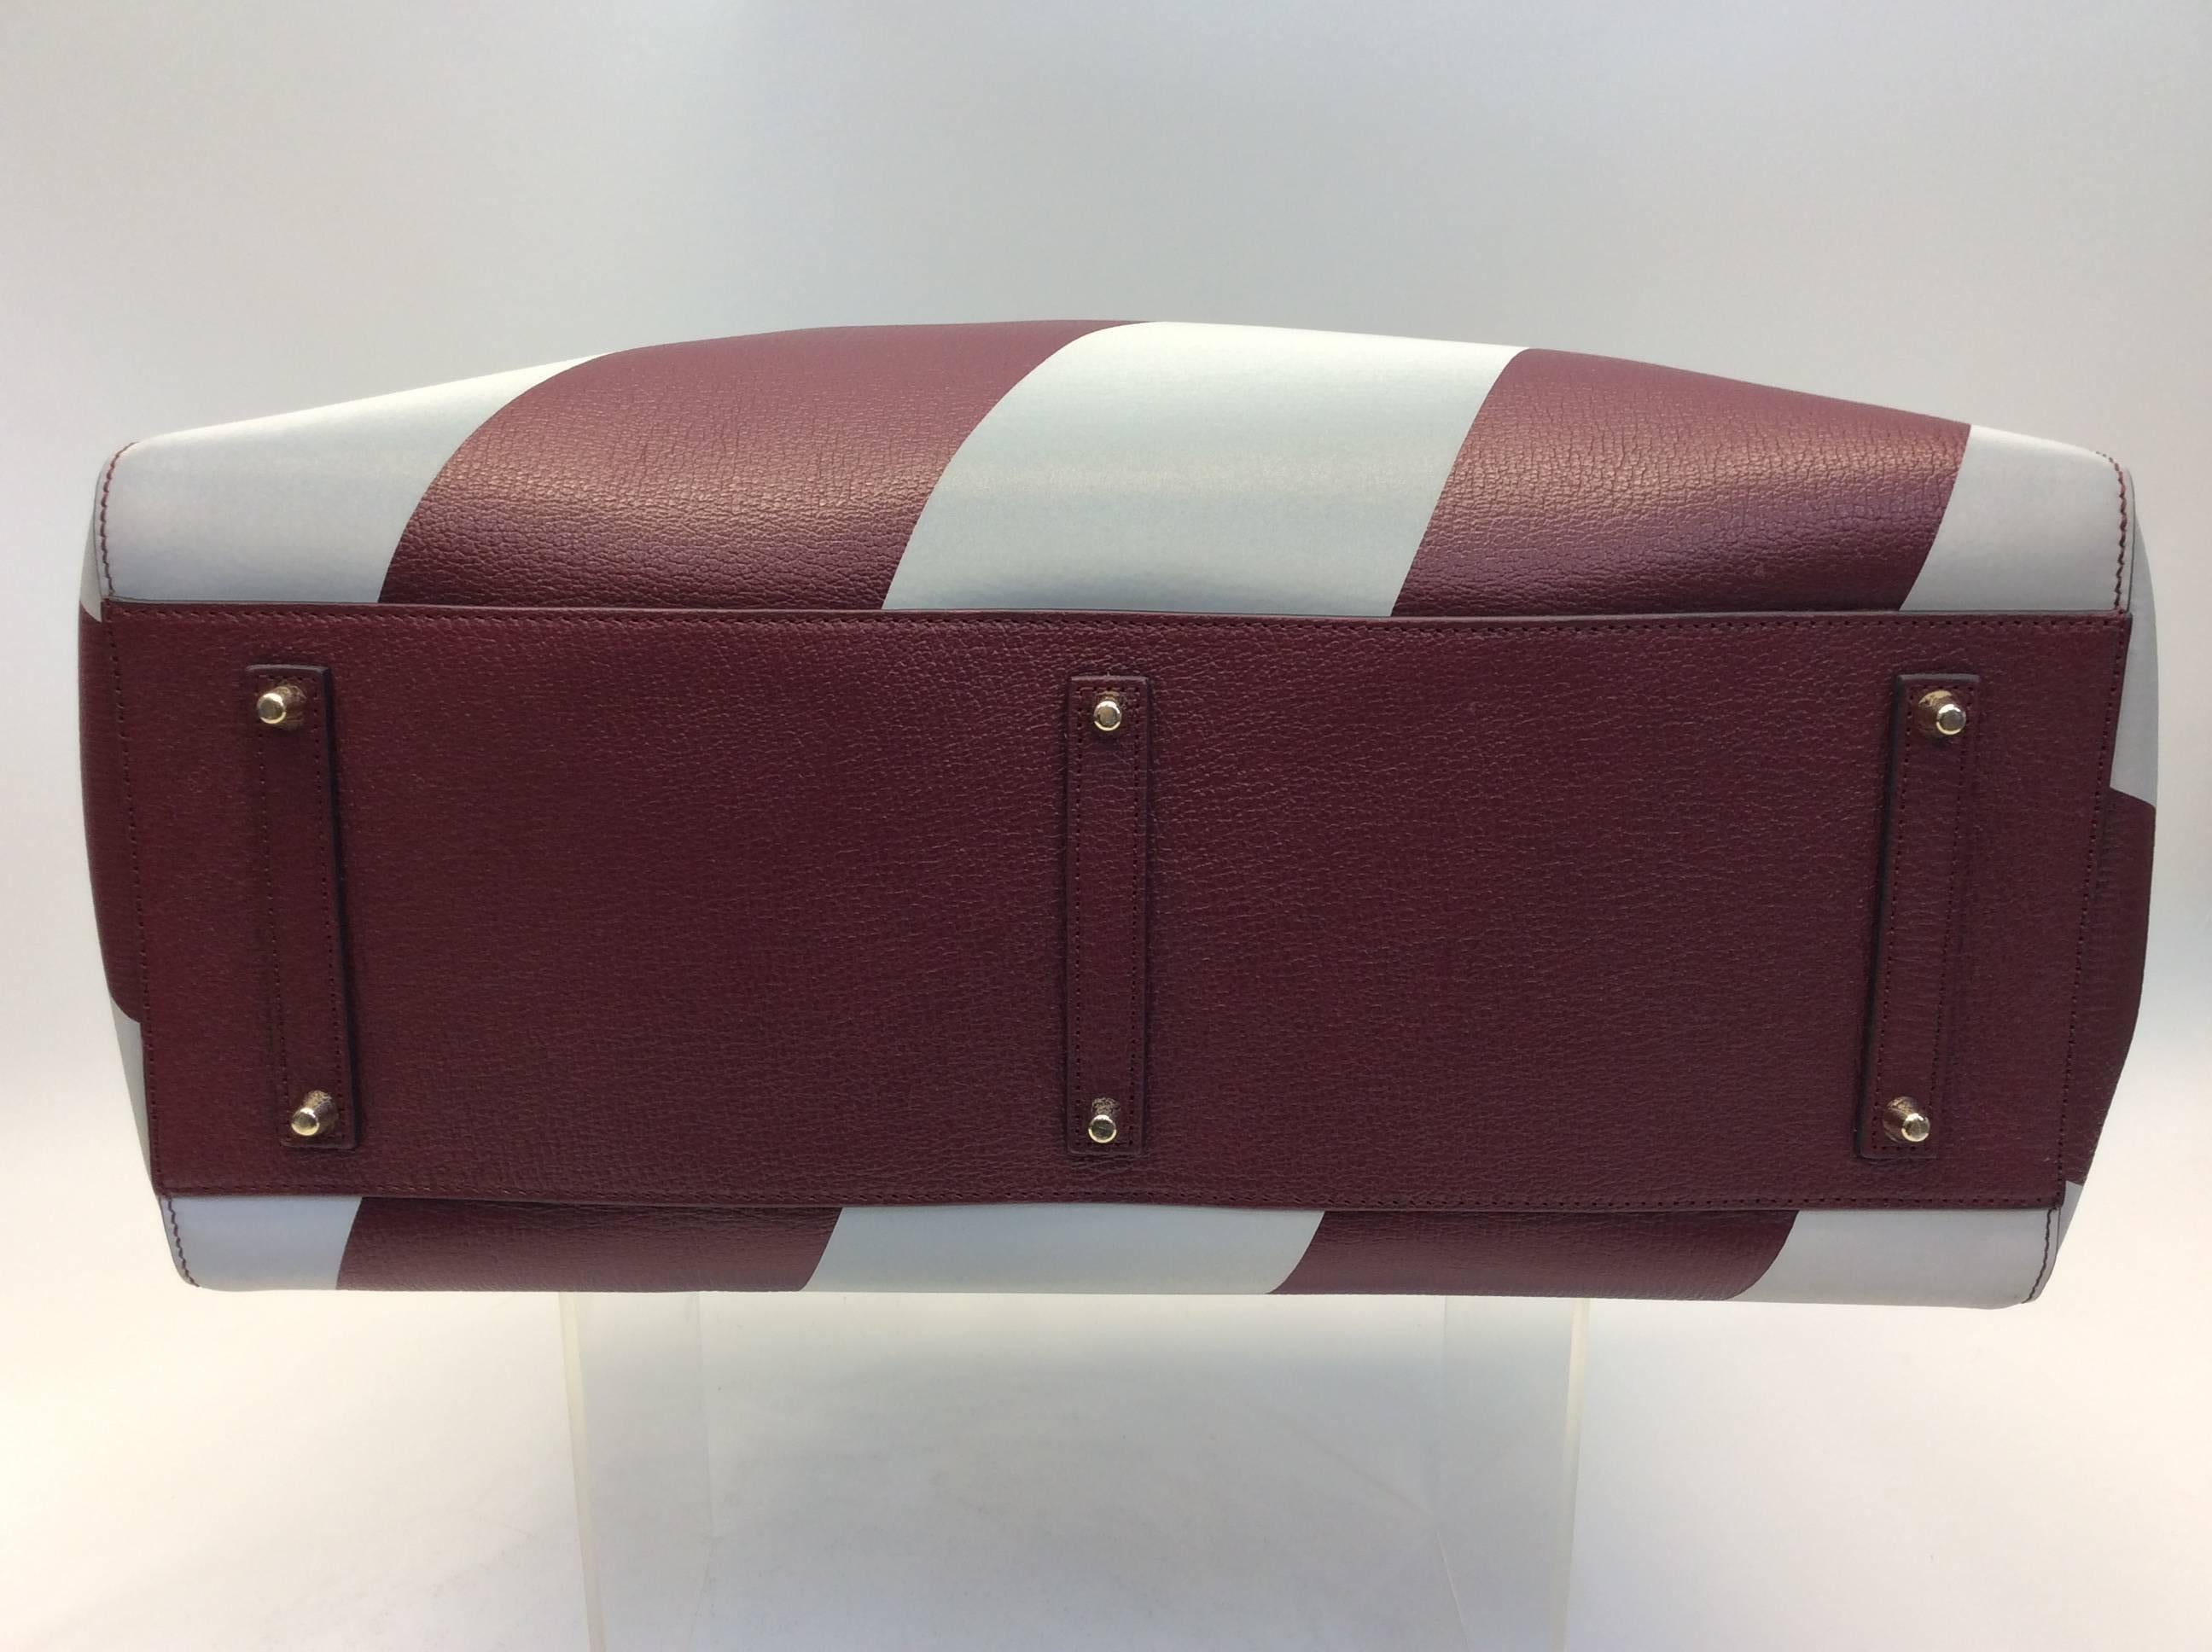 Anya Hindmarch Burgandy and Grey Tote In Excellent Condition For Sale In Narberth, PA